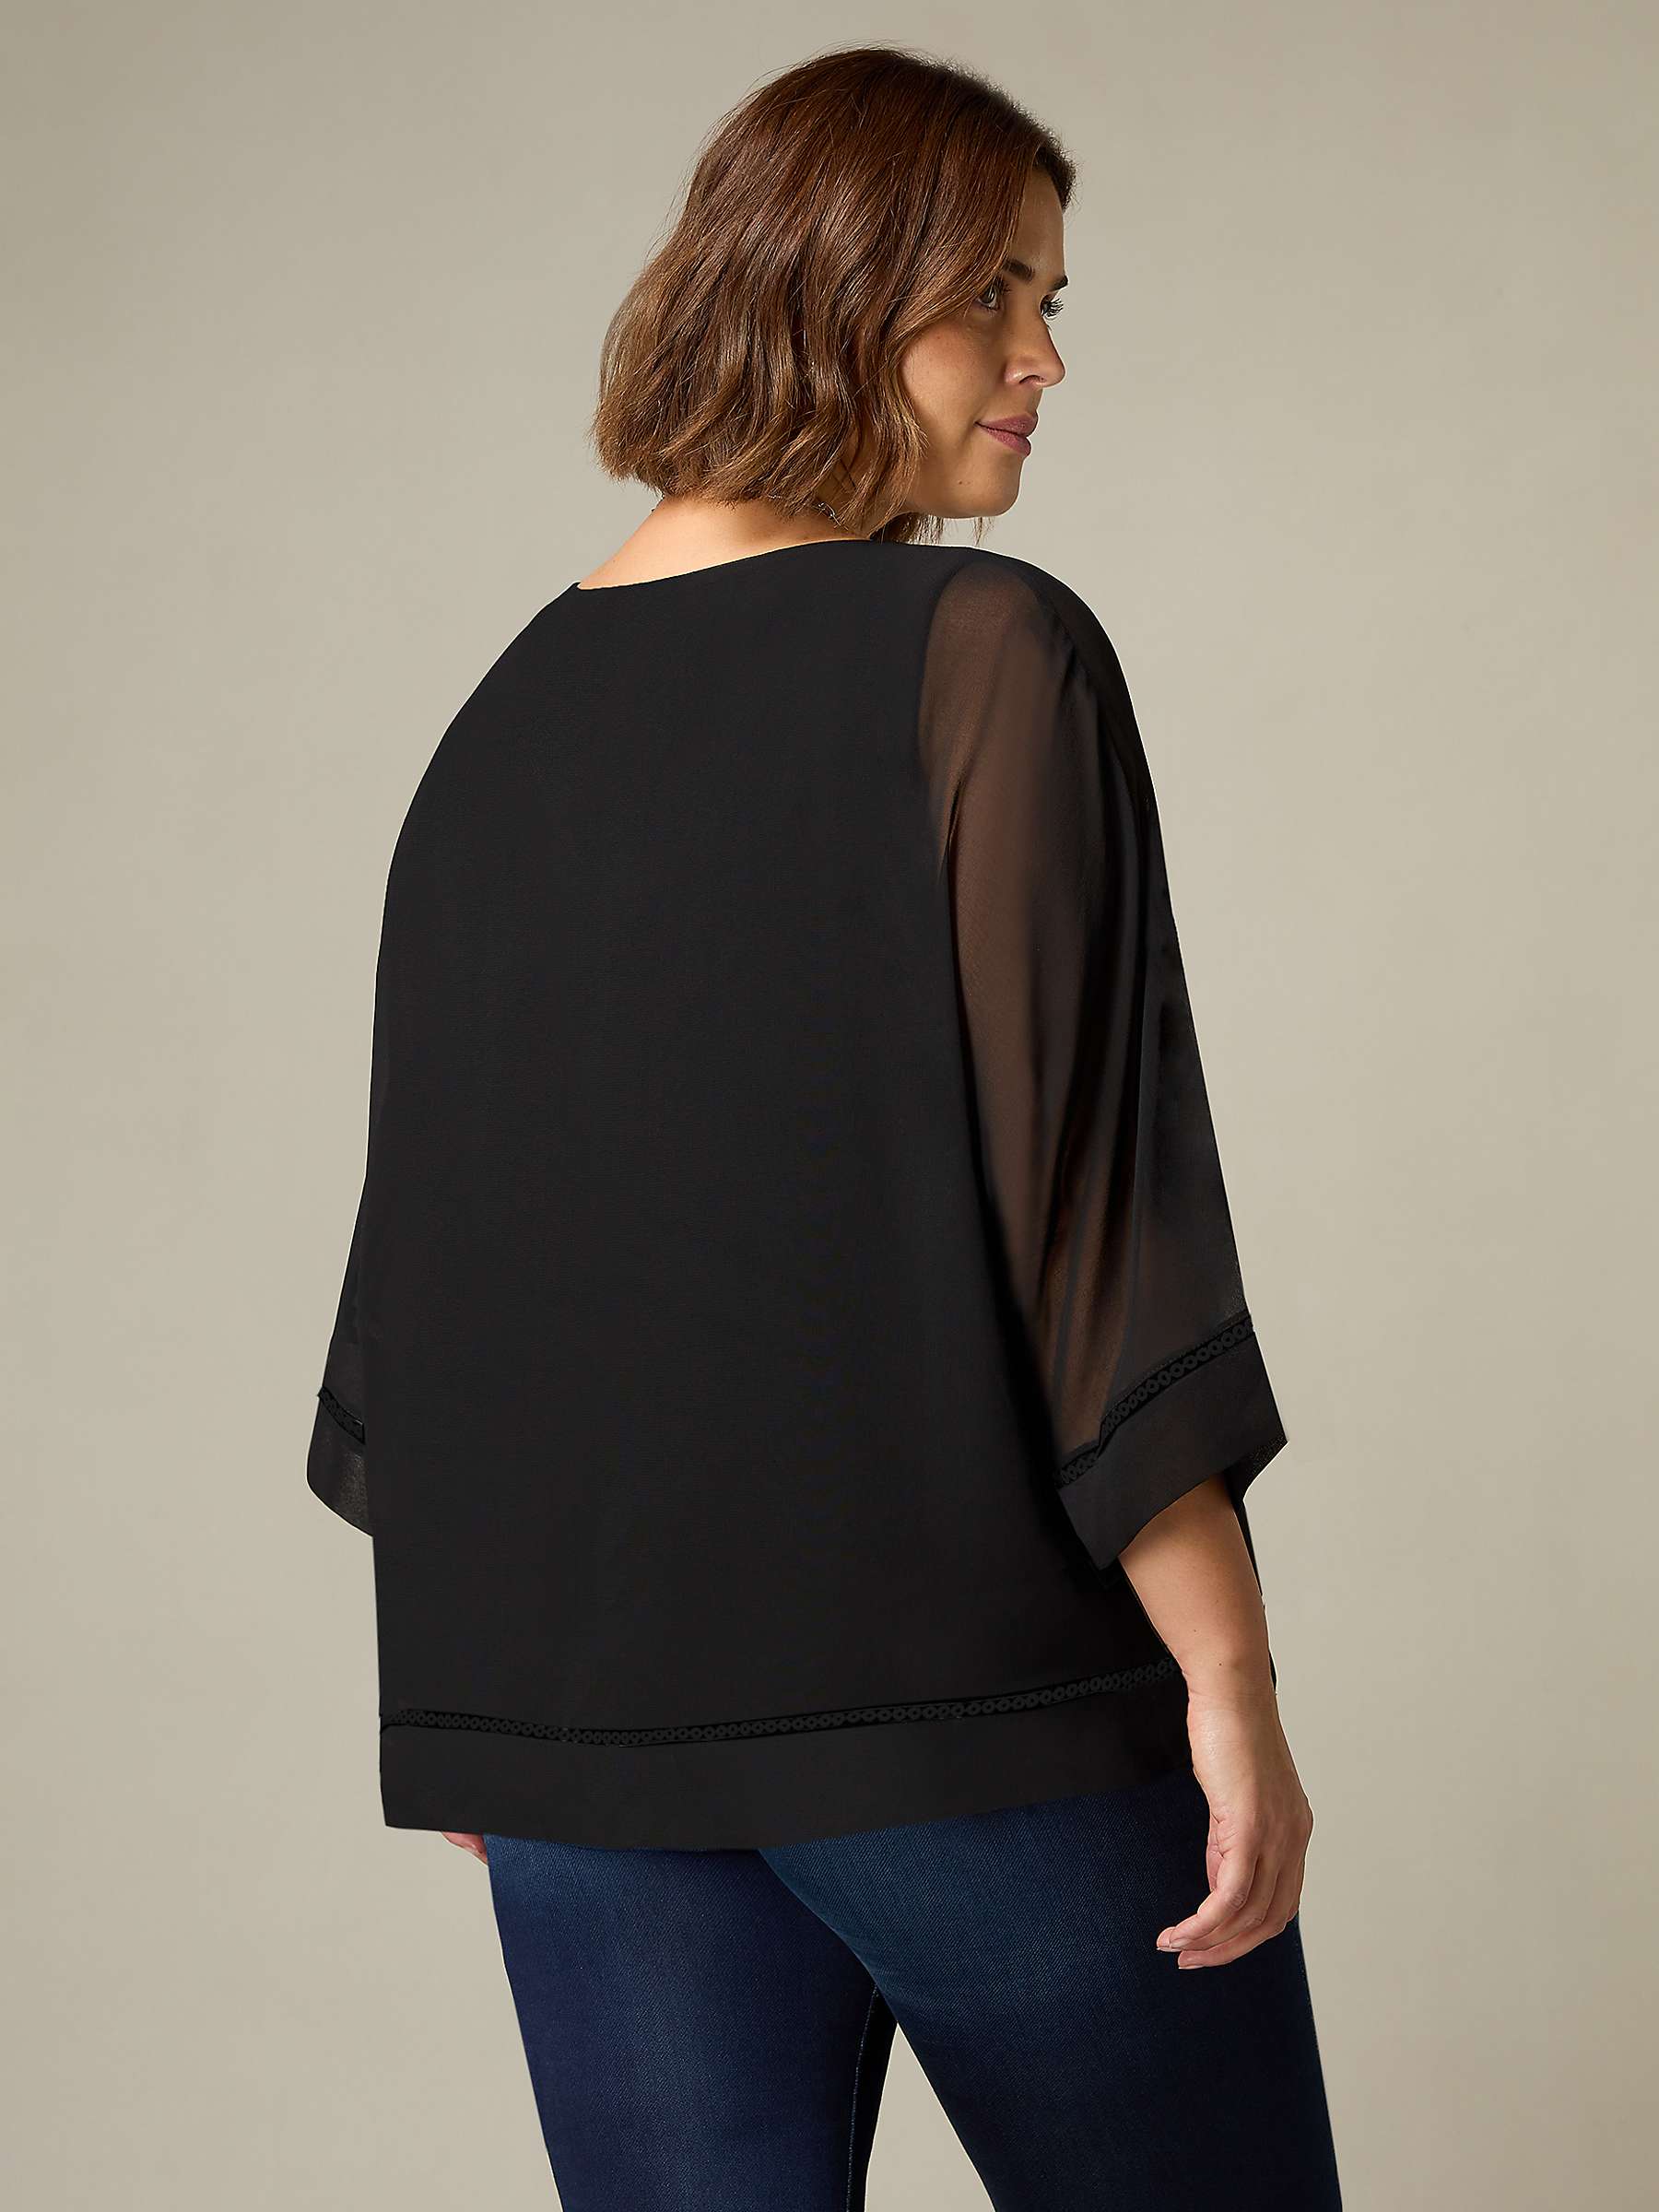 Buy Live Unlimited Curve Chiffon Trim Insert Overlay Top, Black Online at johnlewis.com